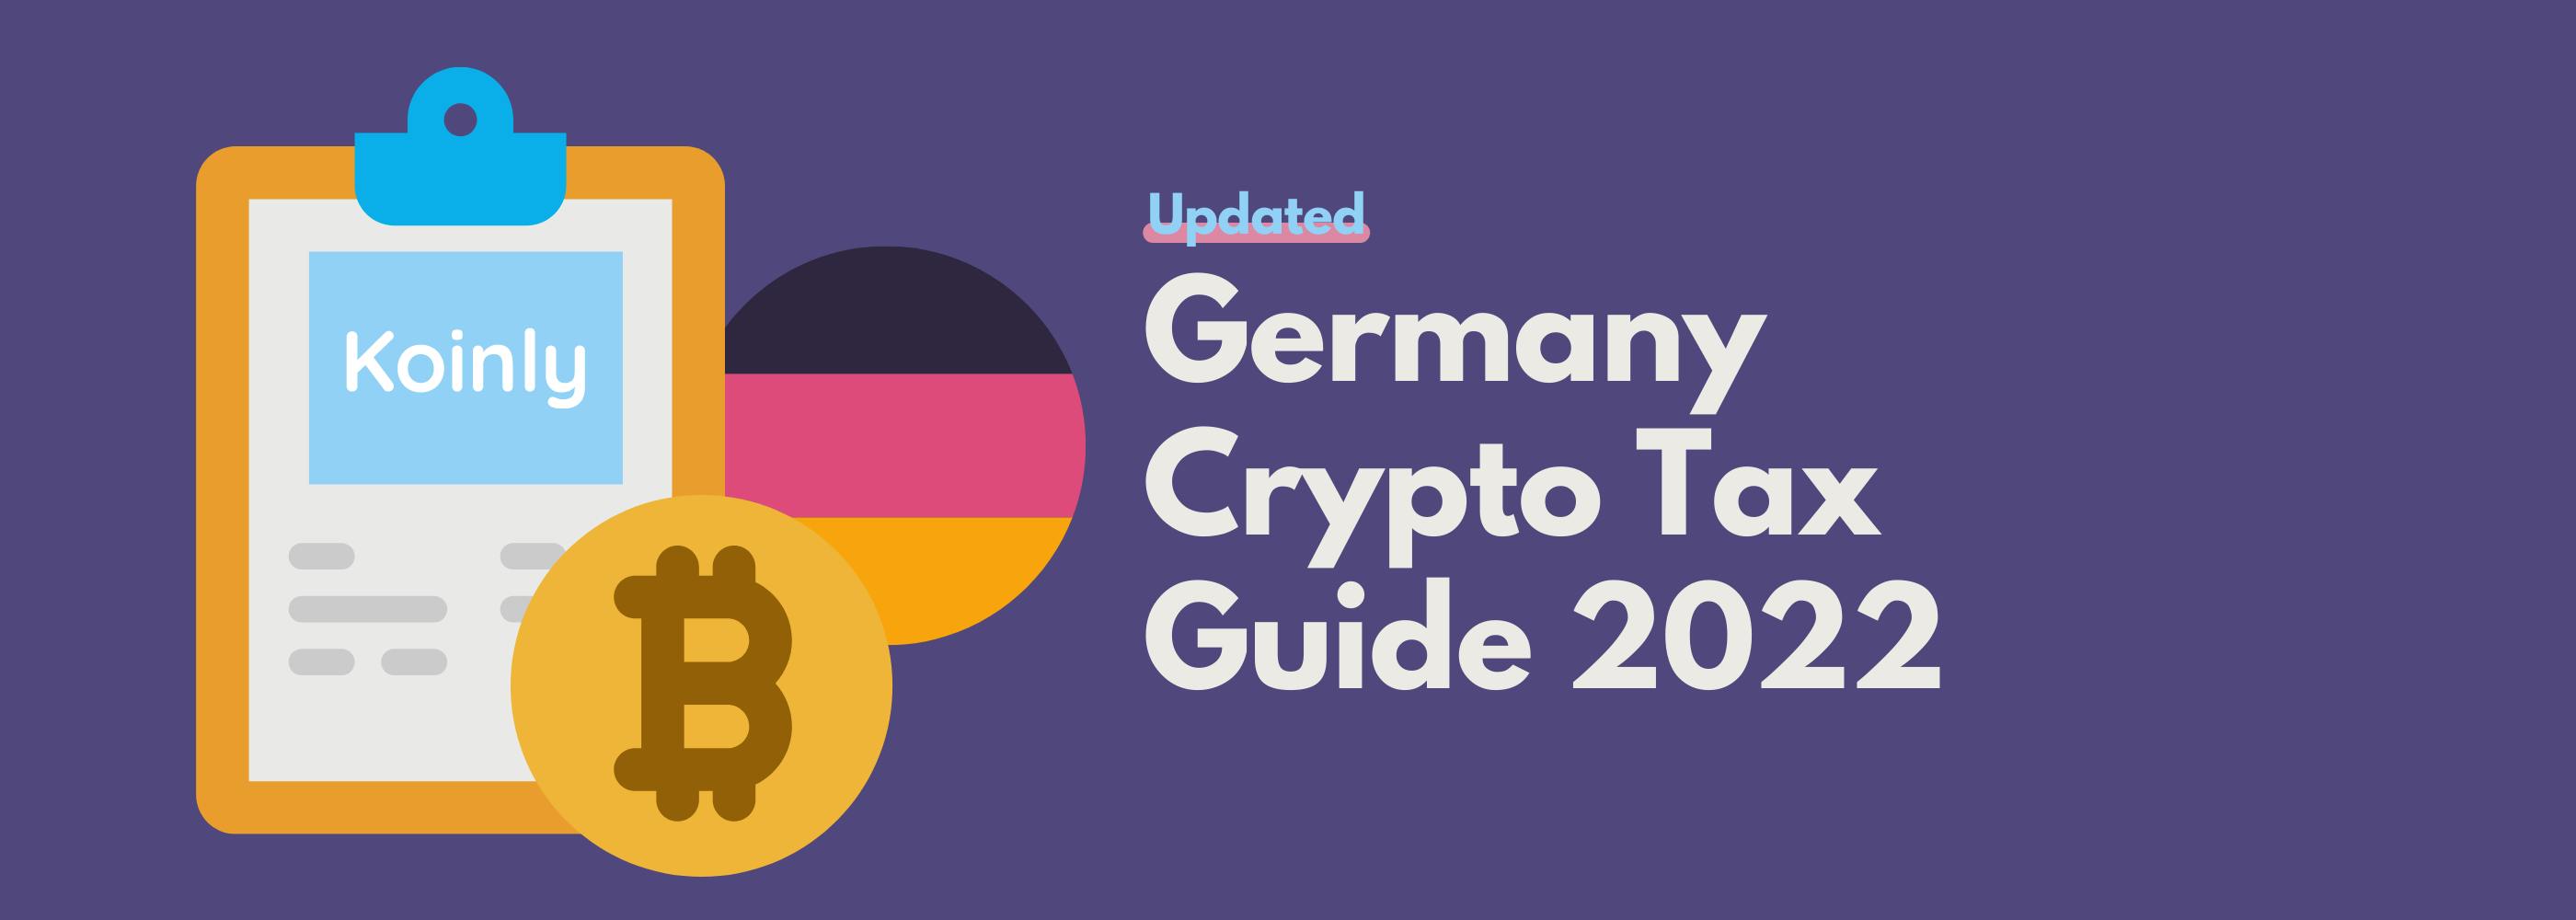 German crypto tax guide